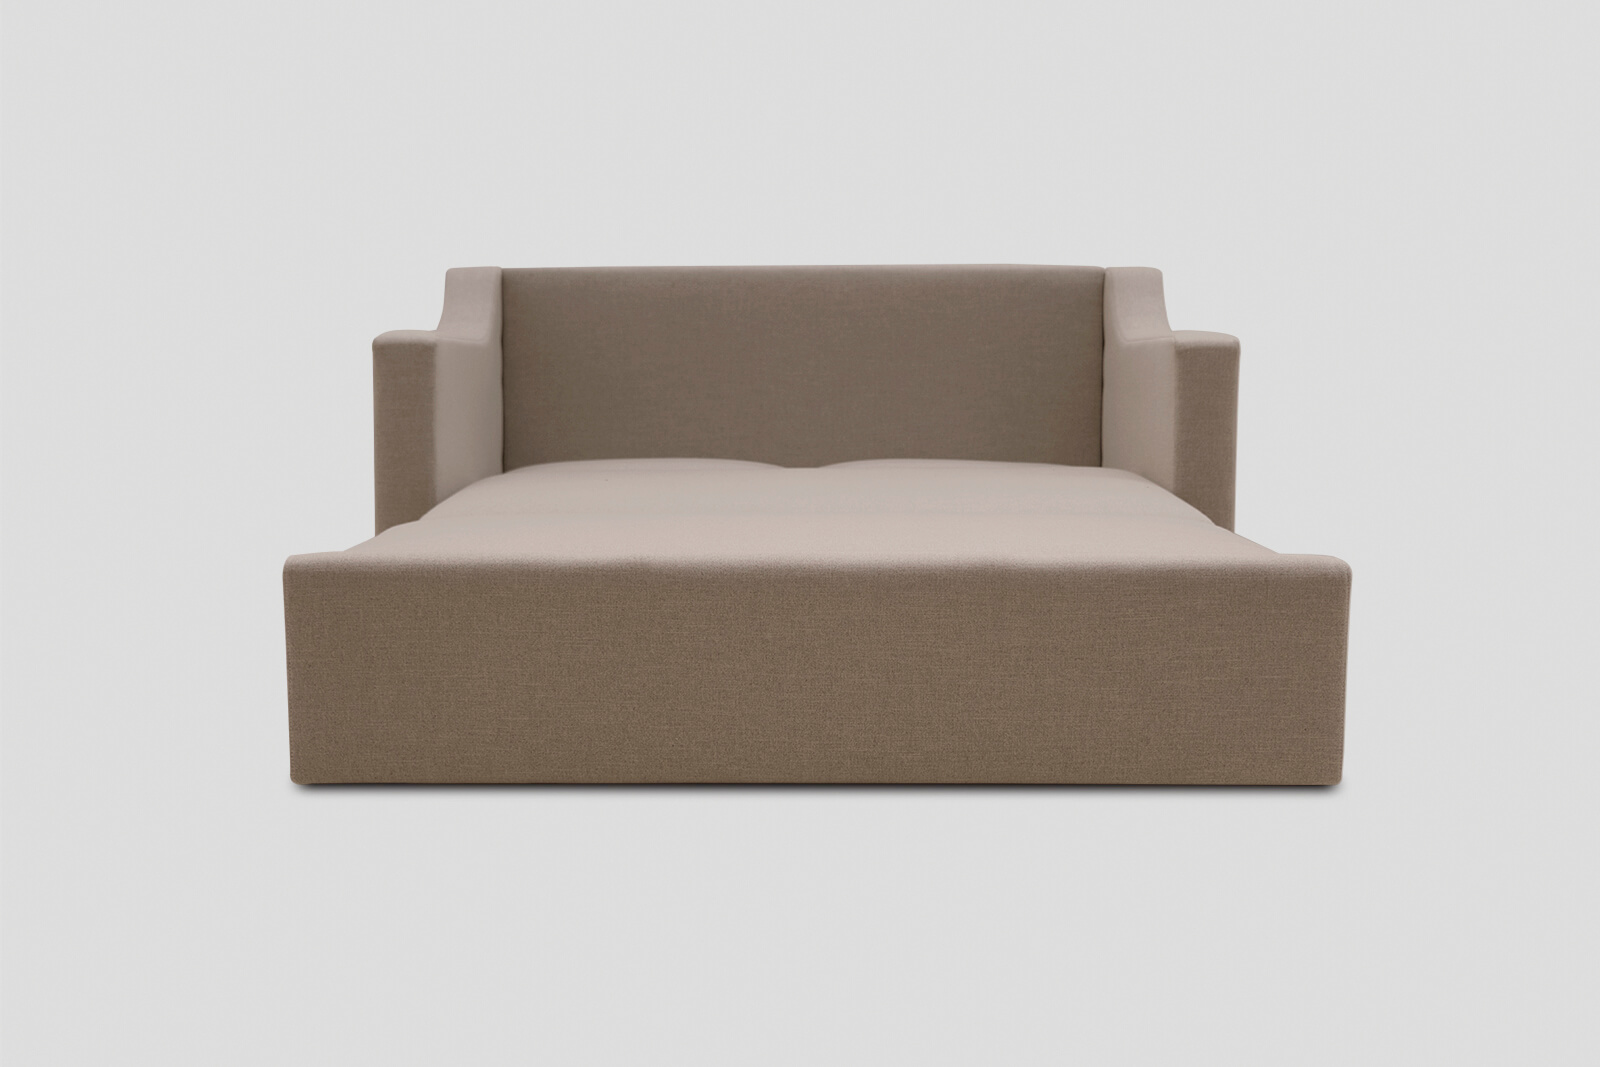 HBSB02-double-sofa-bed-husk-bed-front